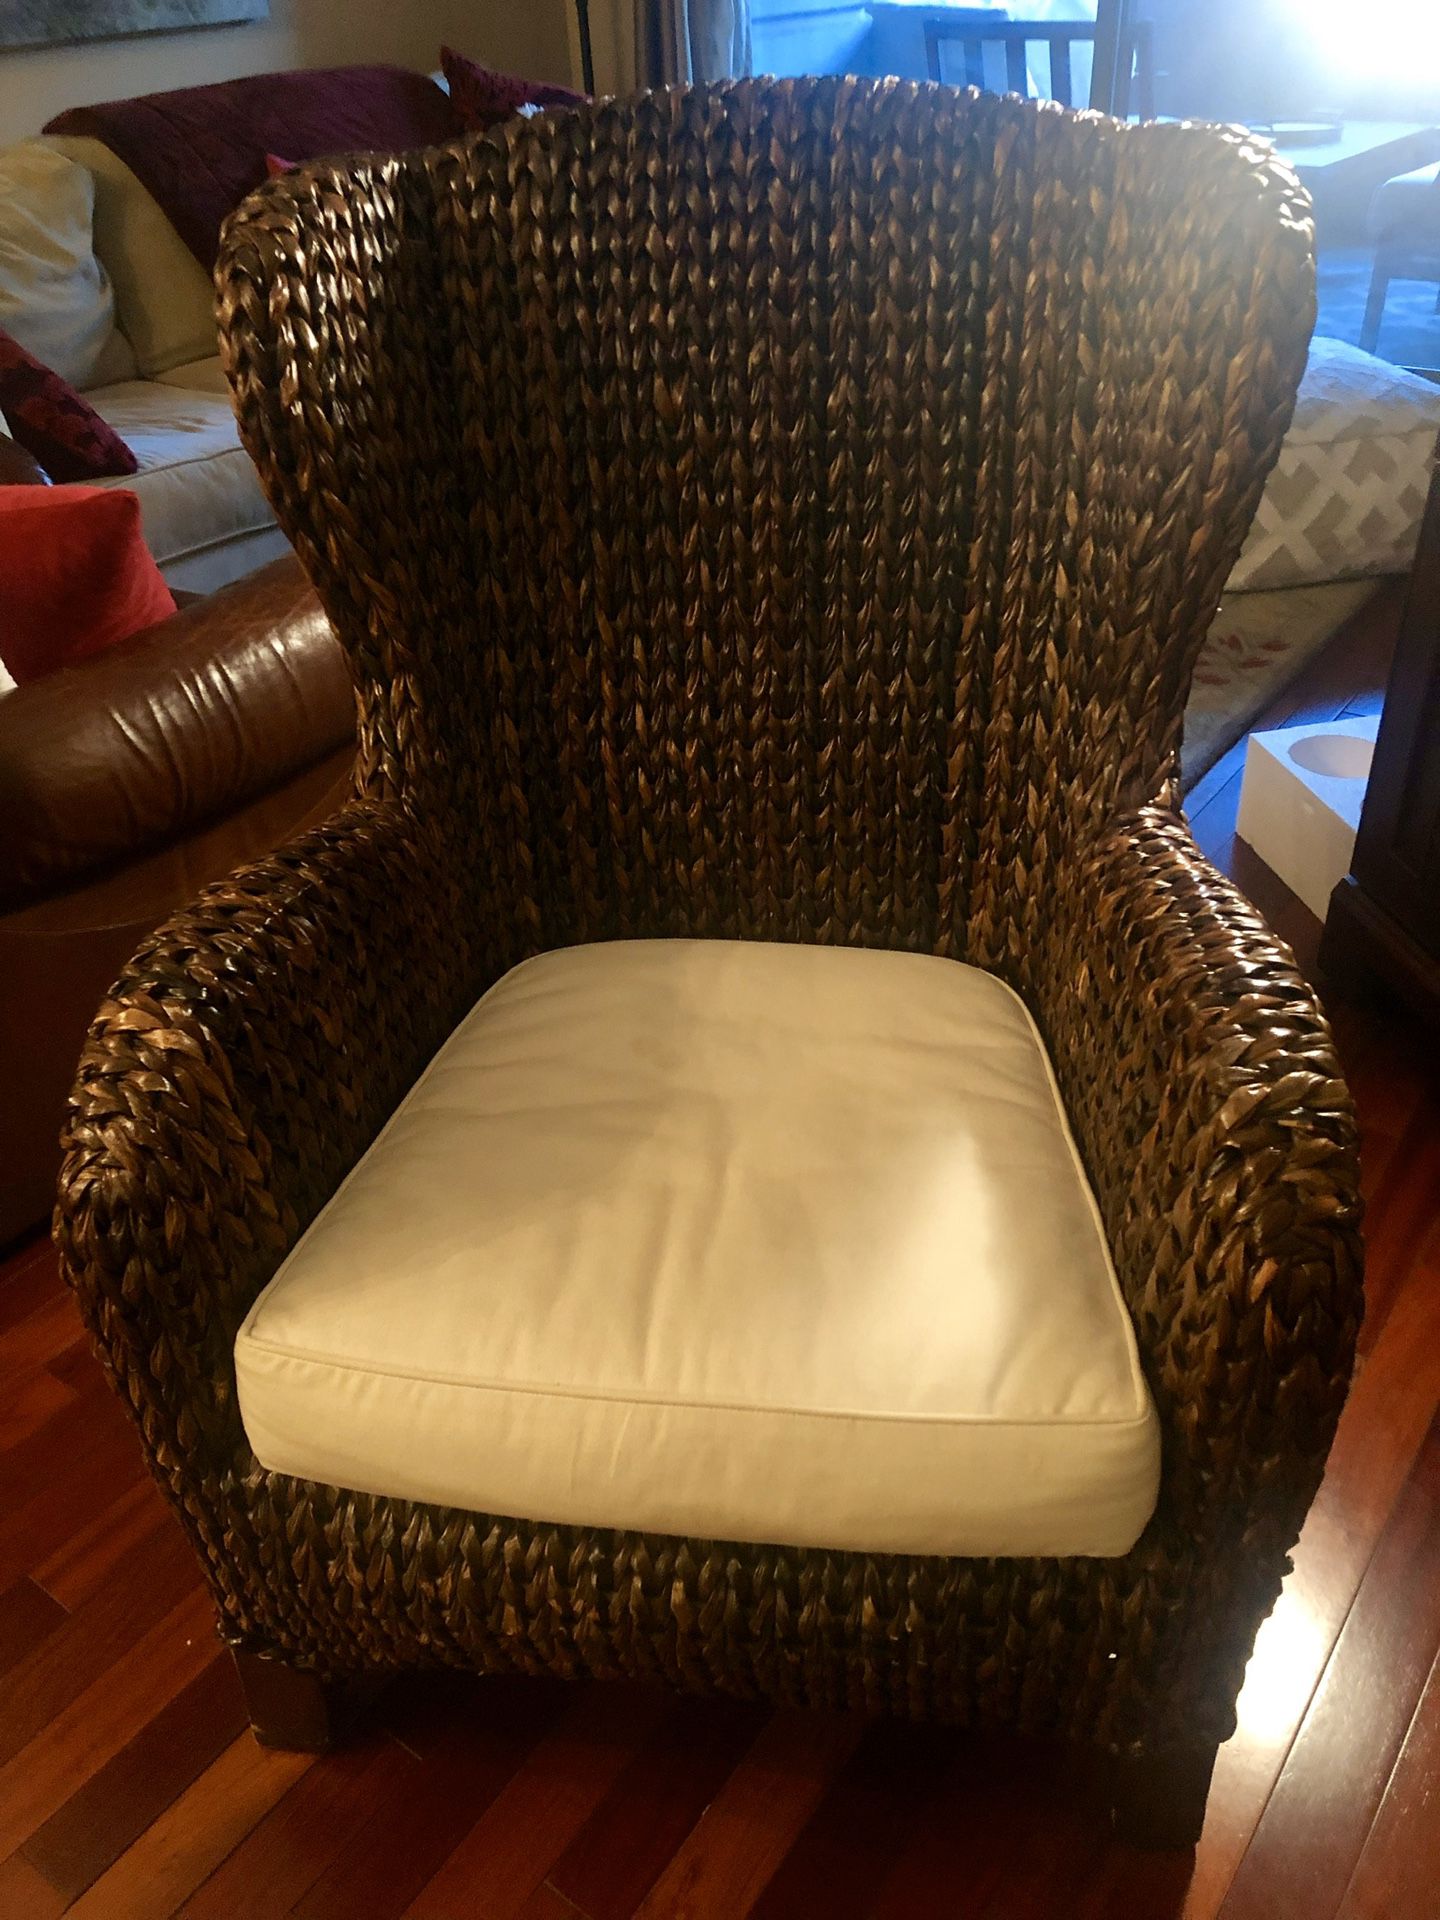 Pottery Barn Wicker Chair - Good condition